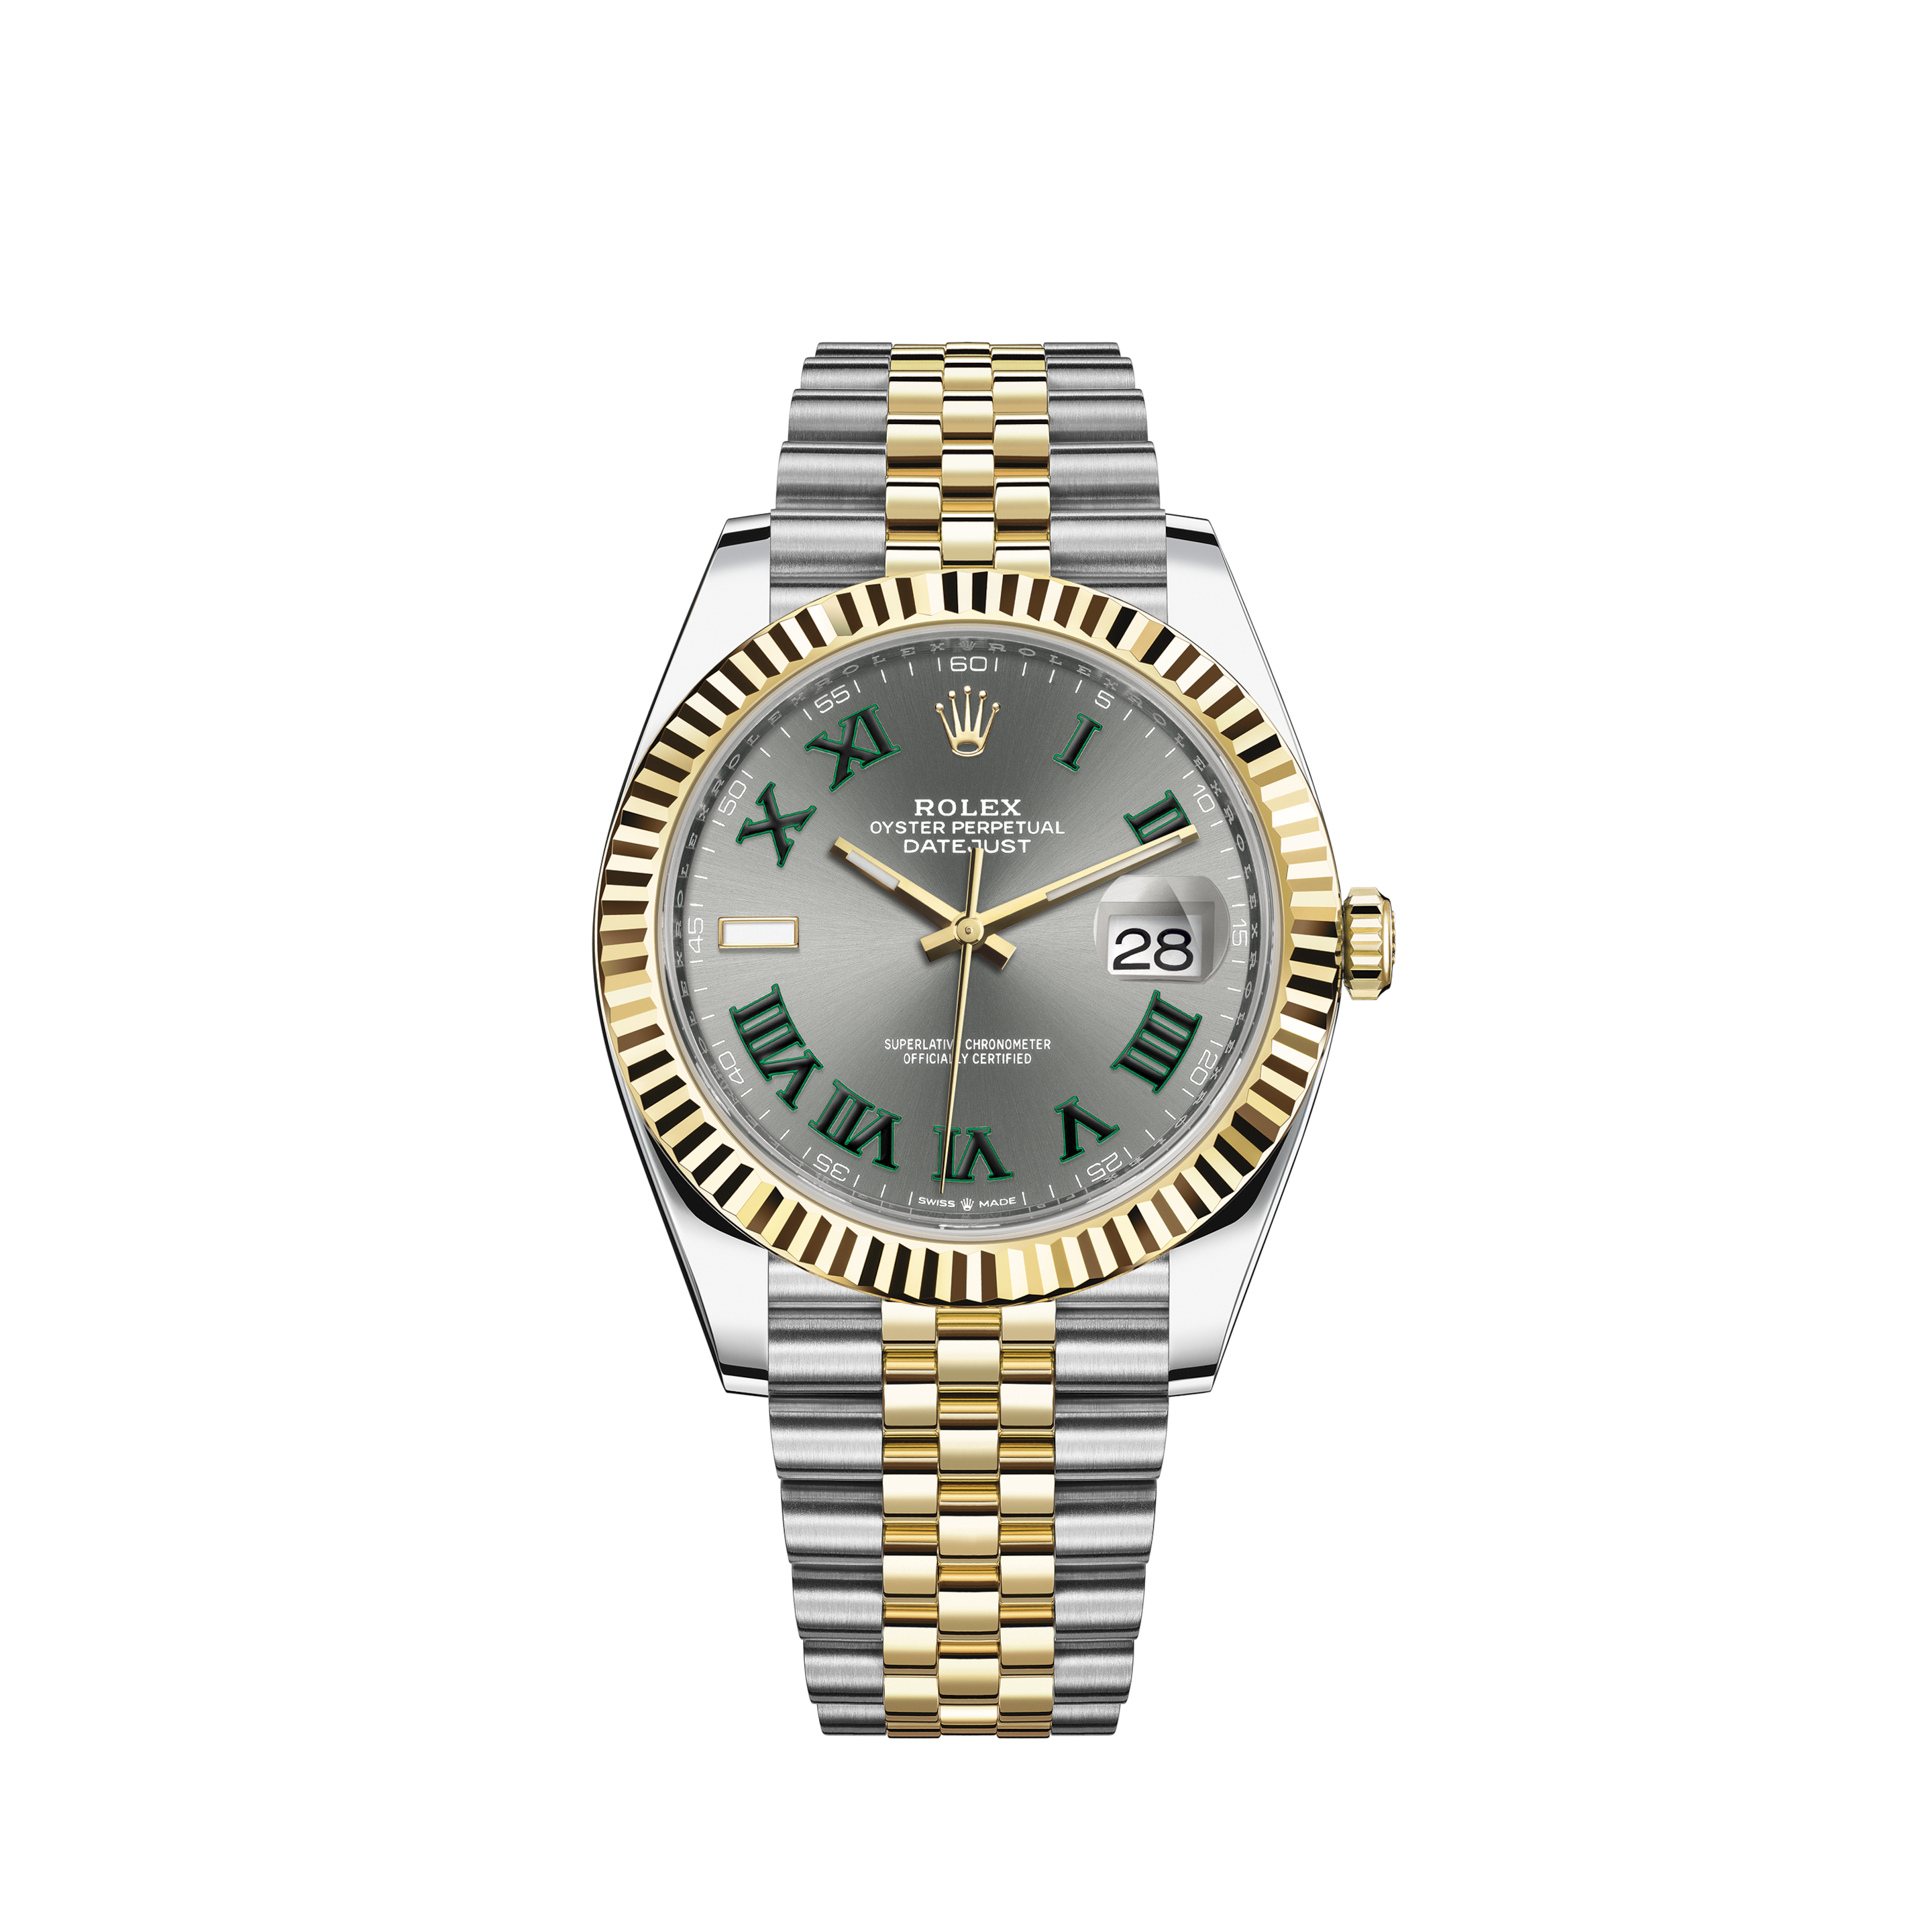 Rolex Women's Customized Rolex watch 31mm Datejust Stainless Steel Ice Blue Color Dial with Diamond Accent RT